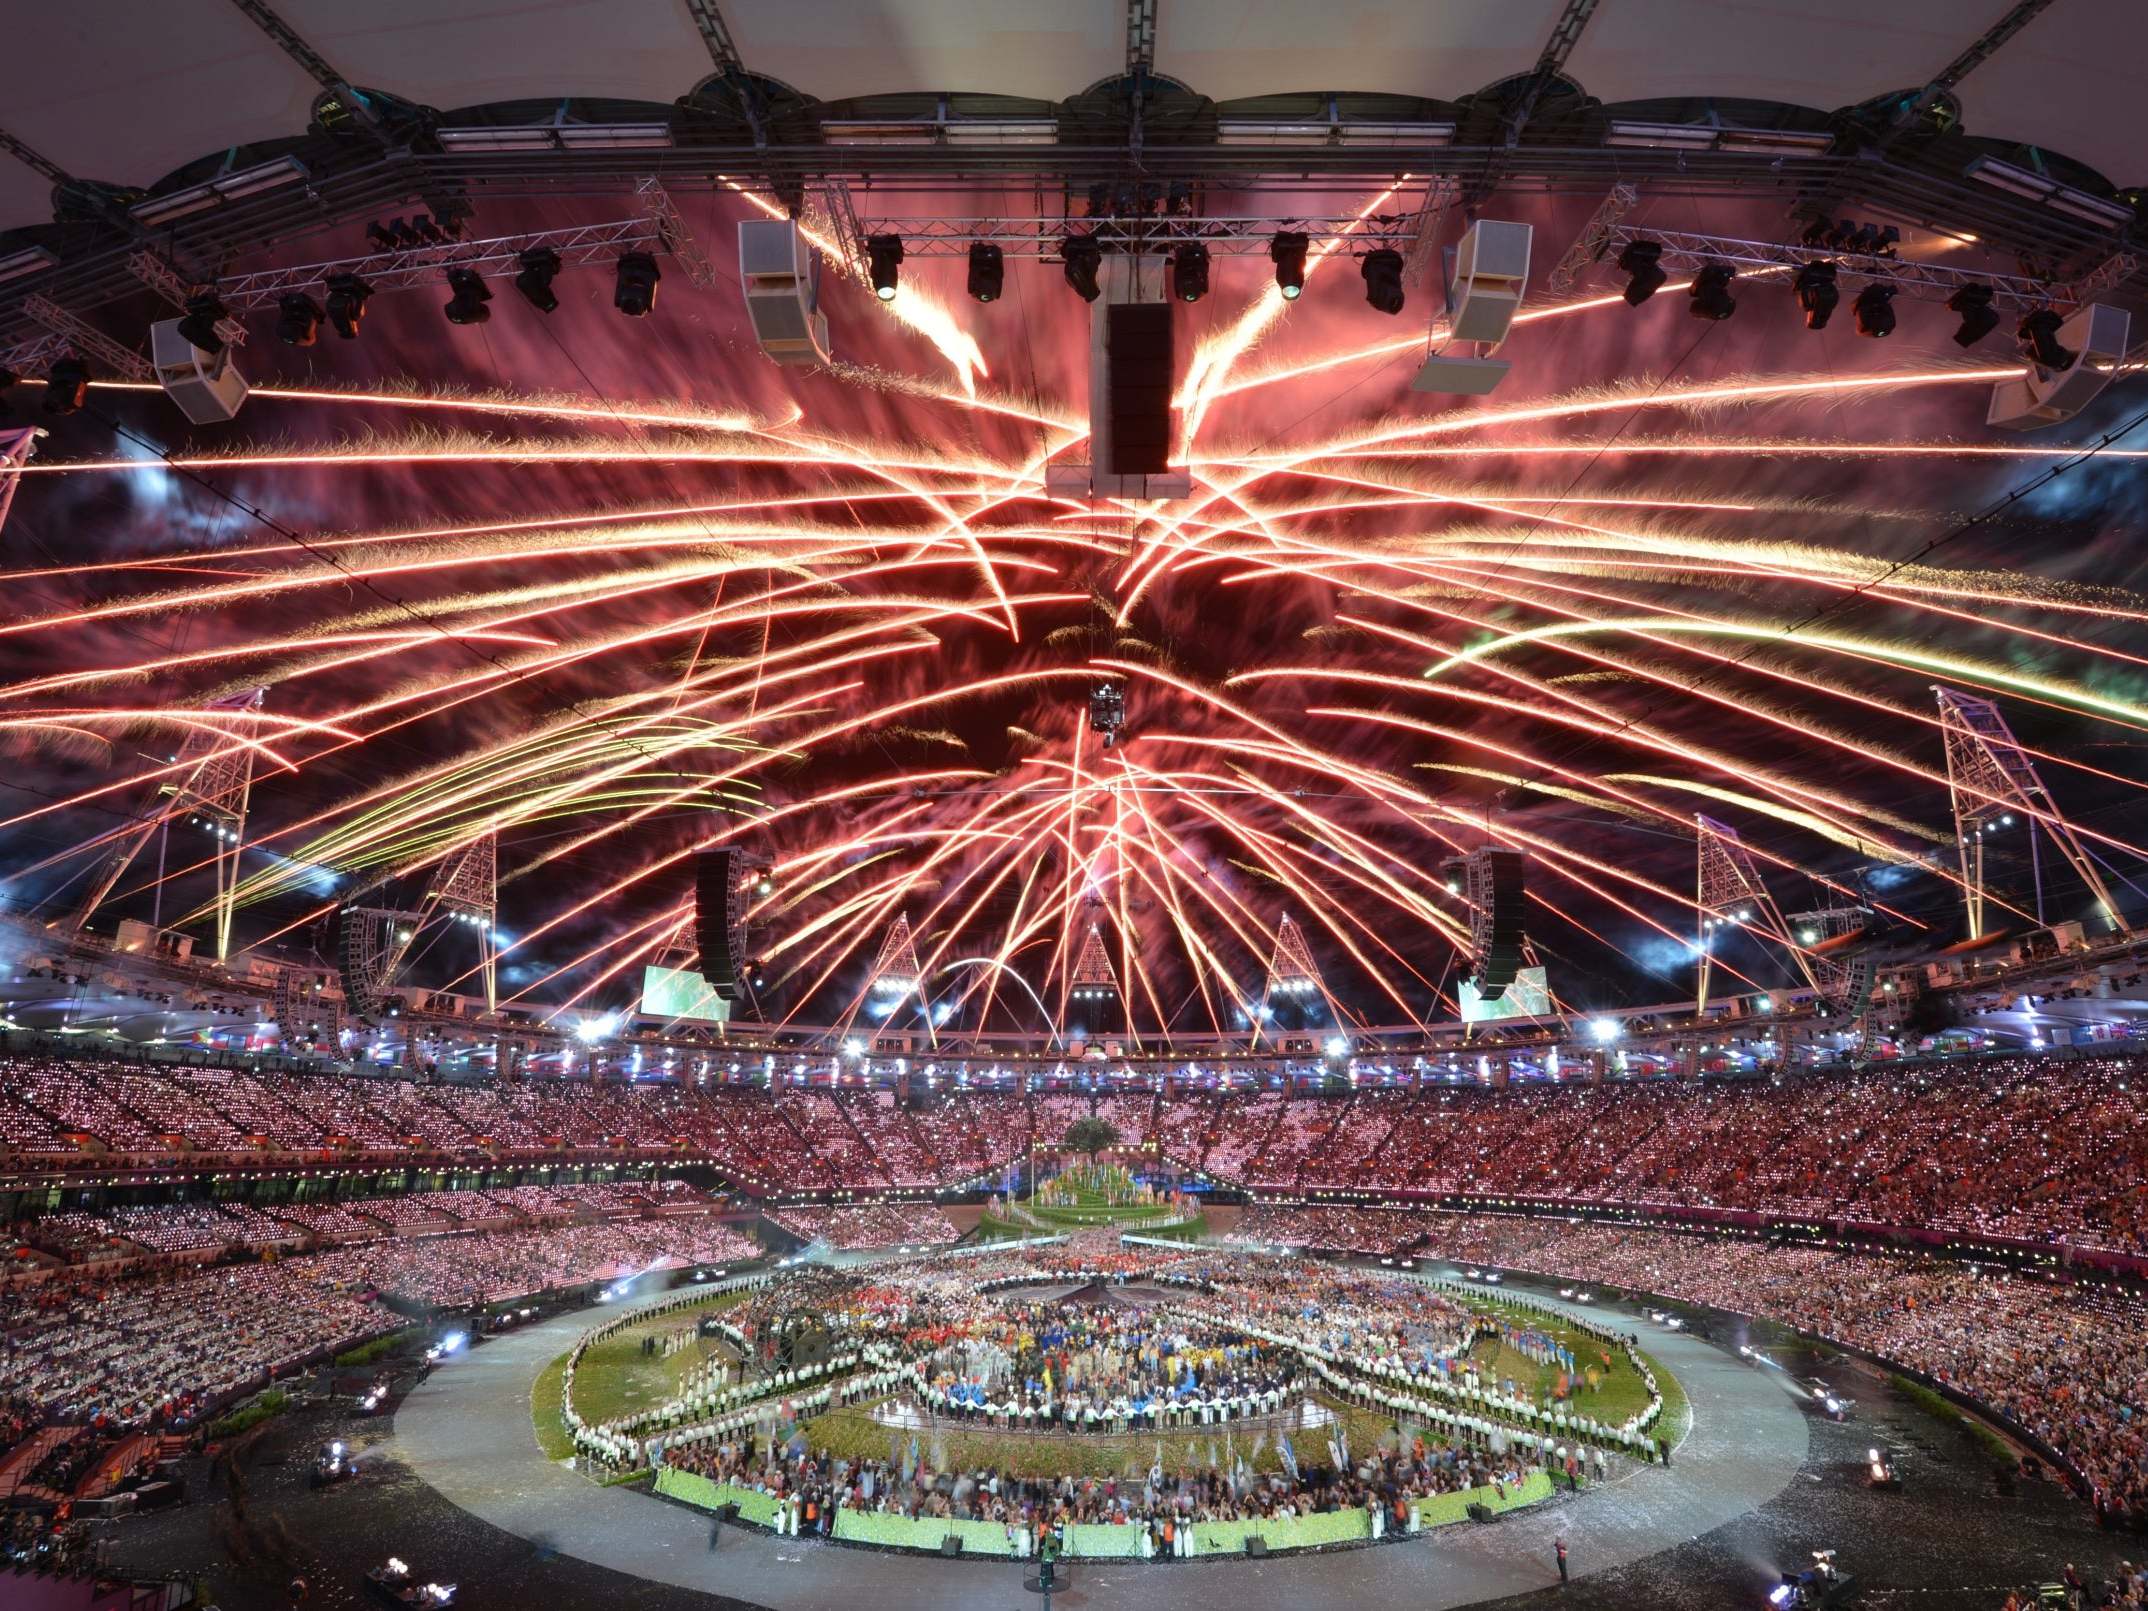 The Olympics 2012 opening ceremony, which was overseen by Martin Green